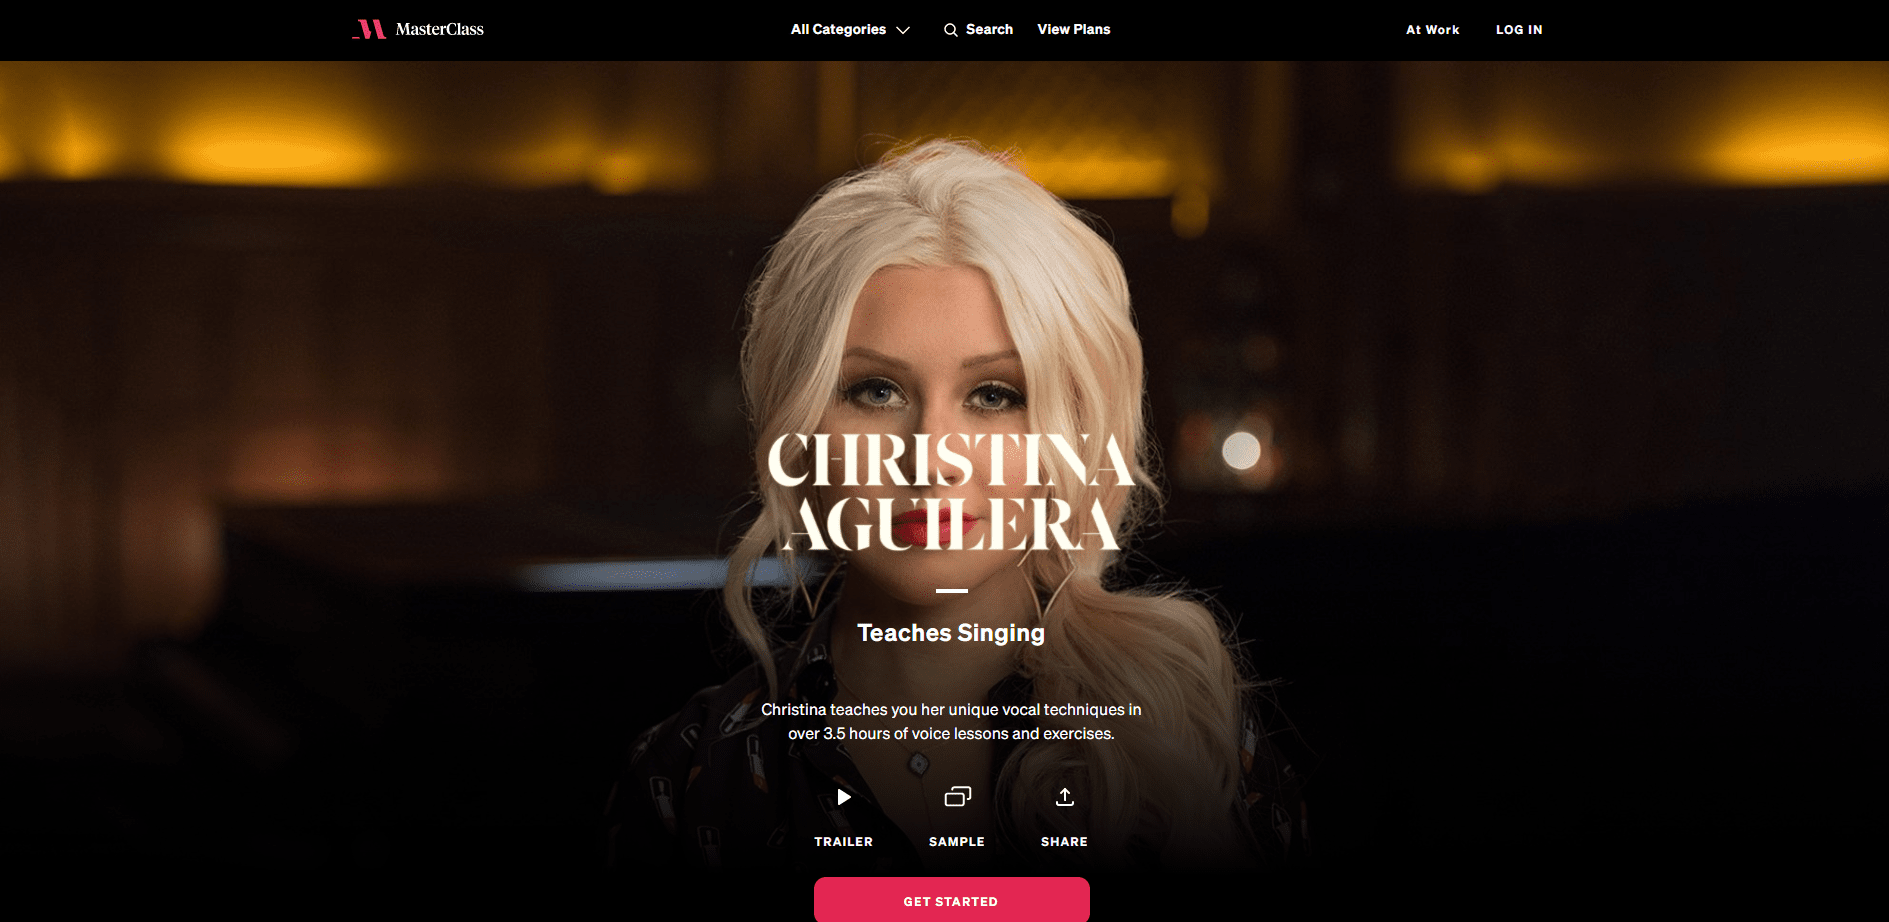 Christina Aguilera Masterclass - Best Online Singing Lessons